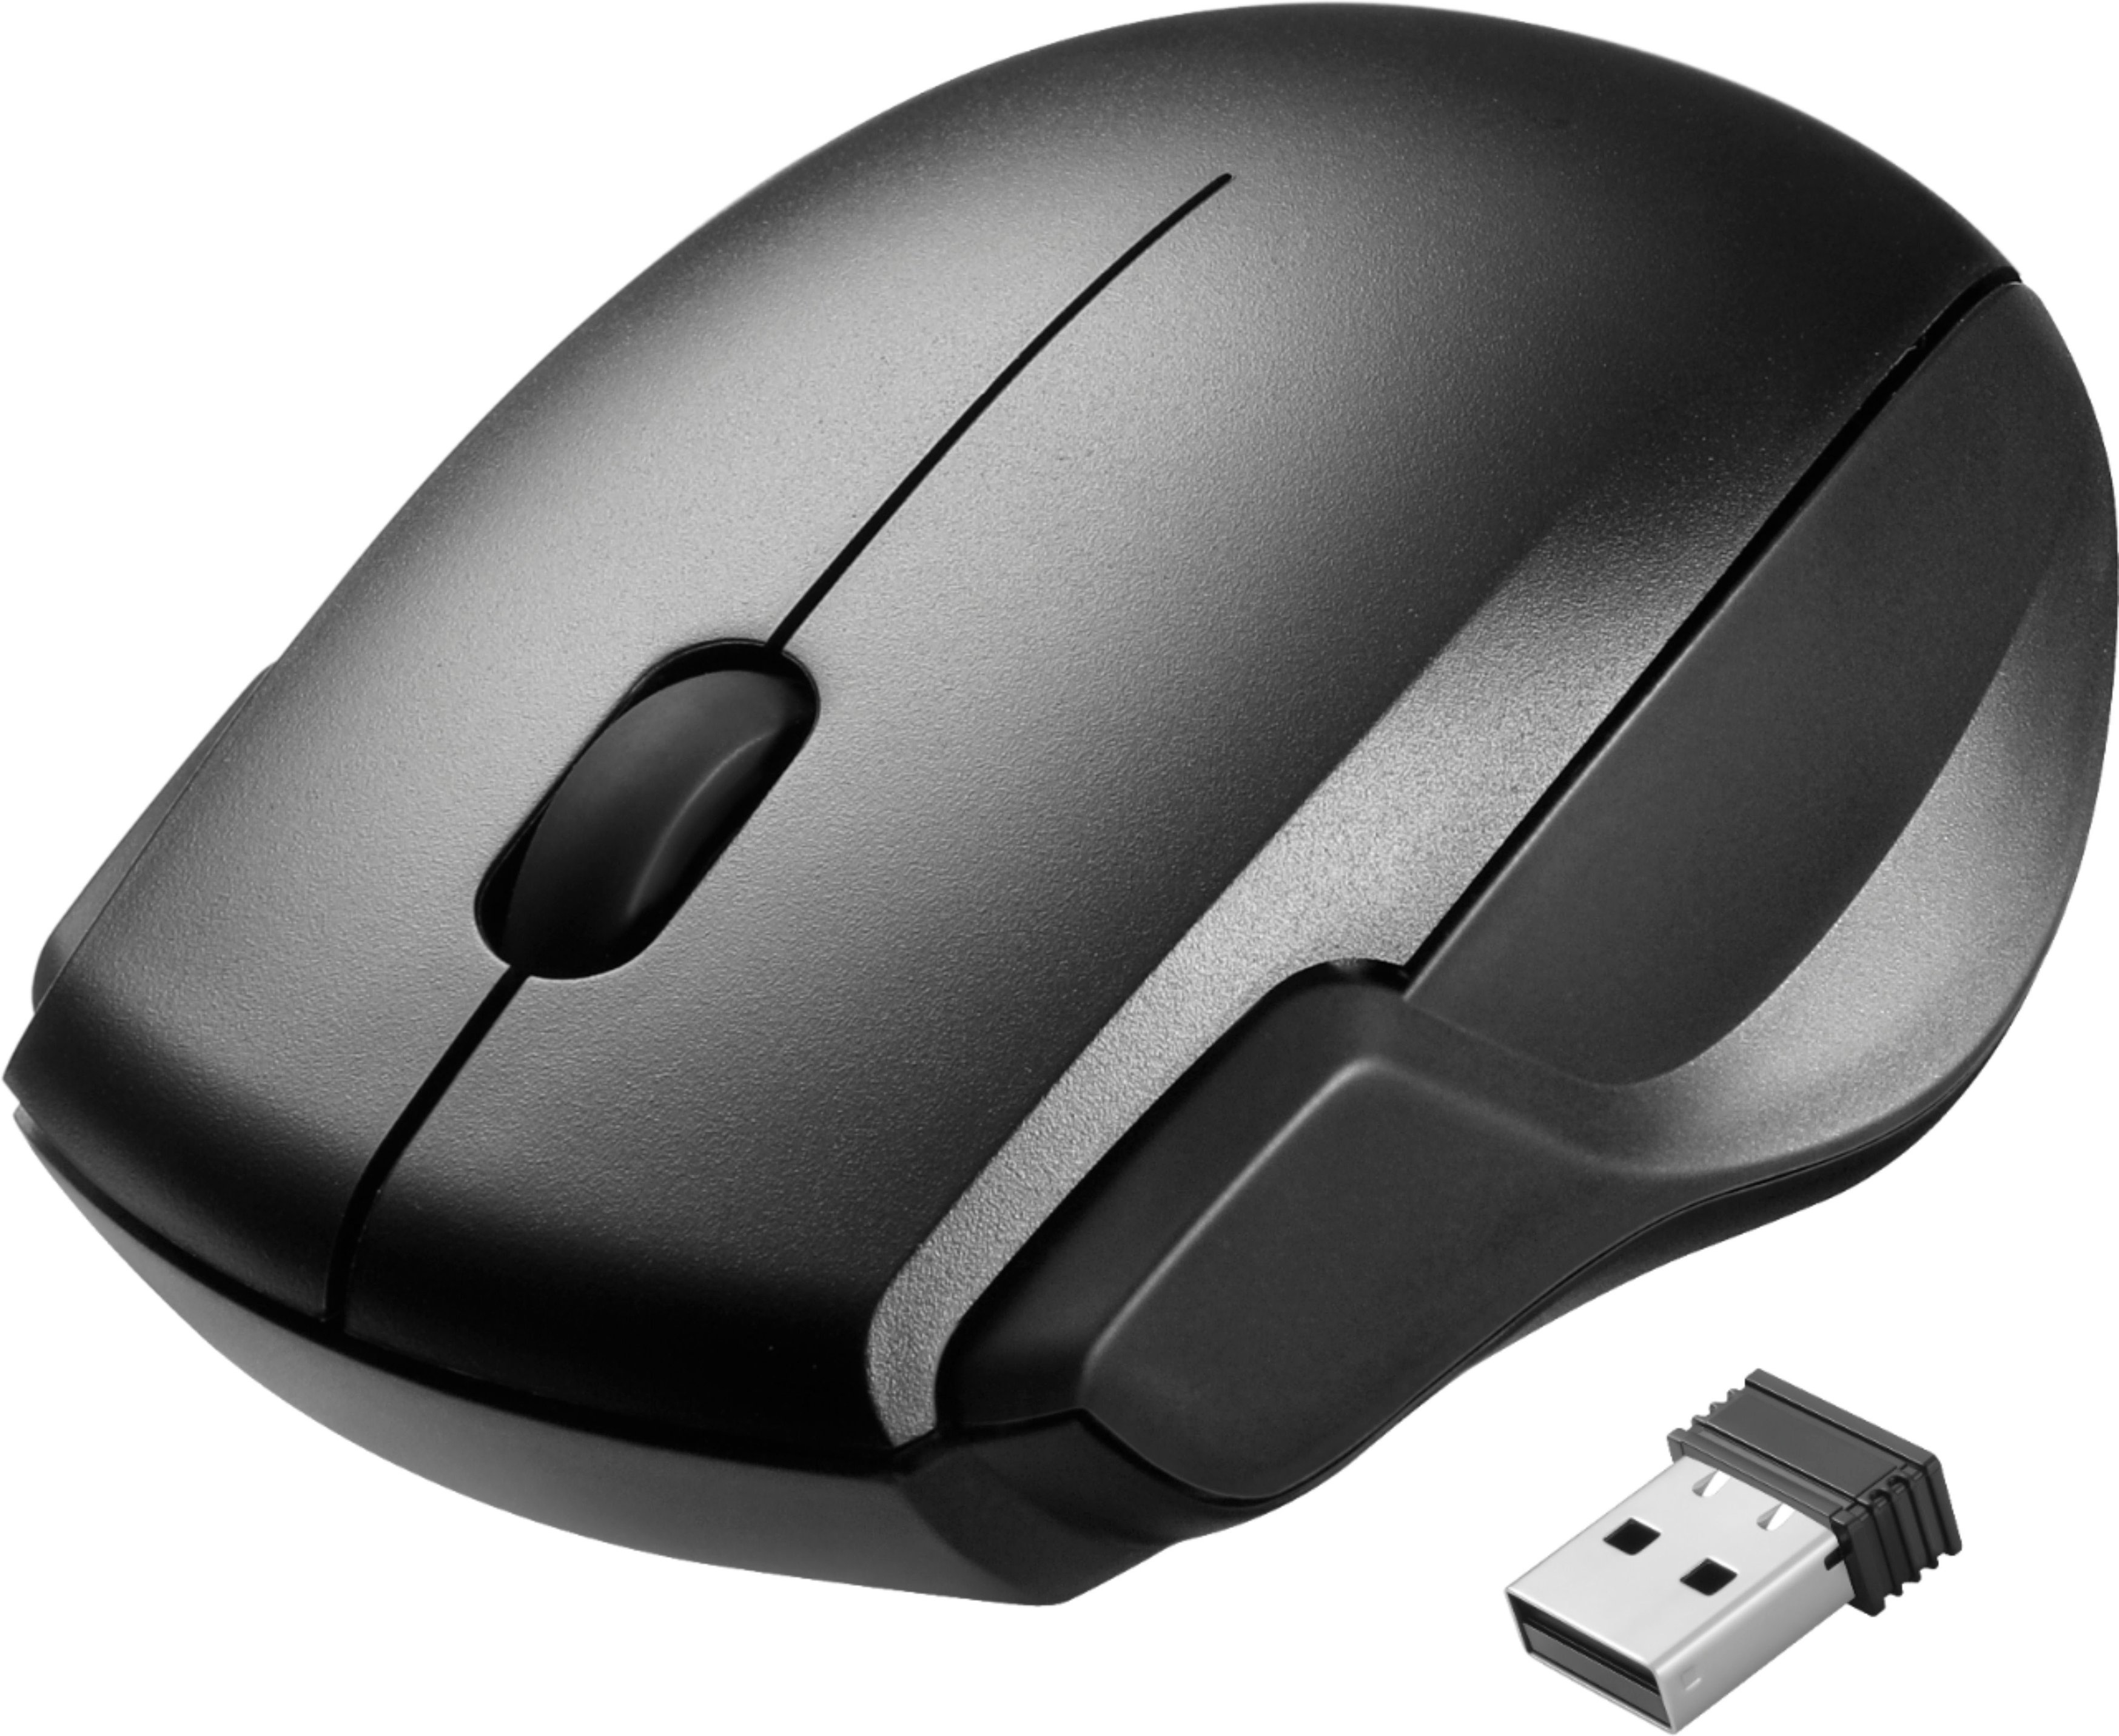 Buy essentials™ Wireless Optical Ambidextrous Mouse with USB Receiver Black BE-PMRF3B - Best Buy